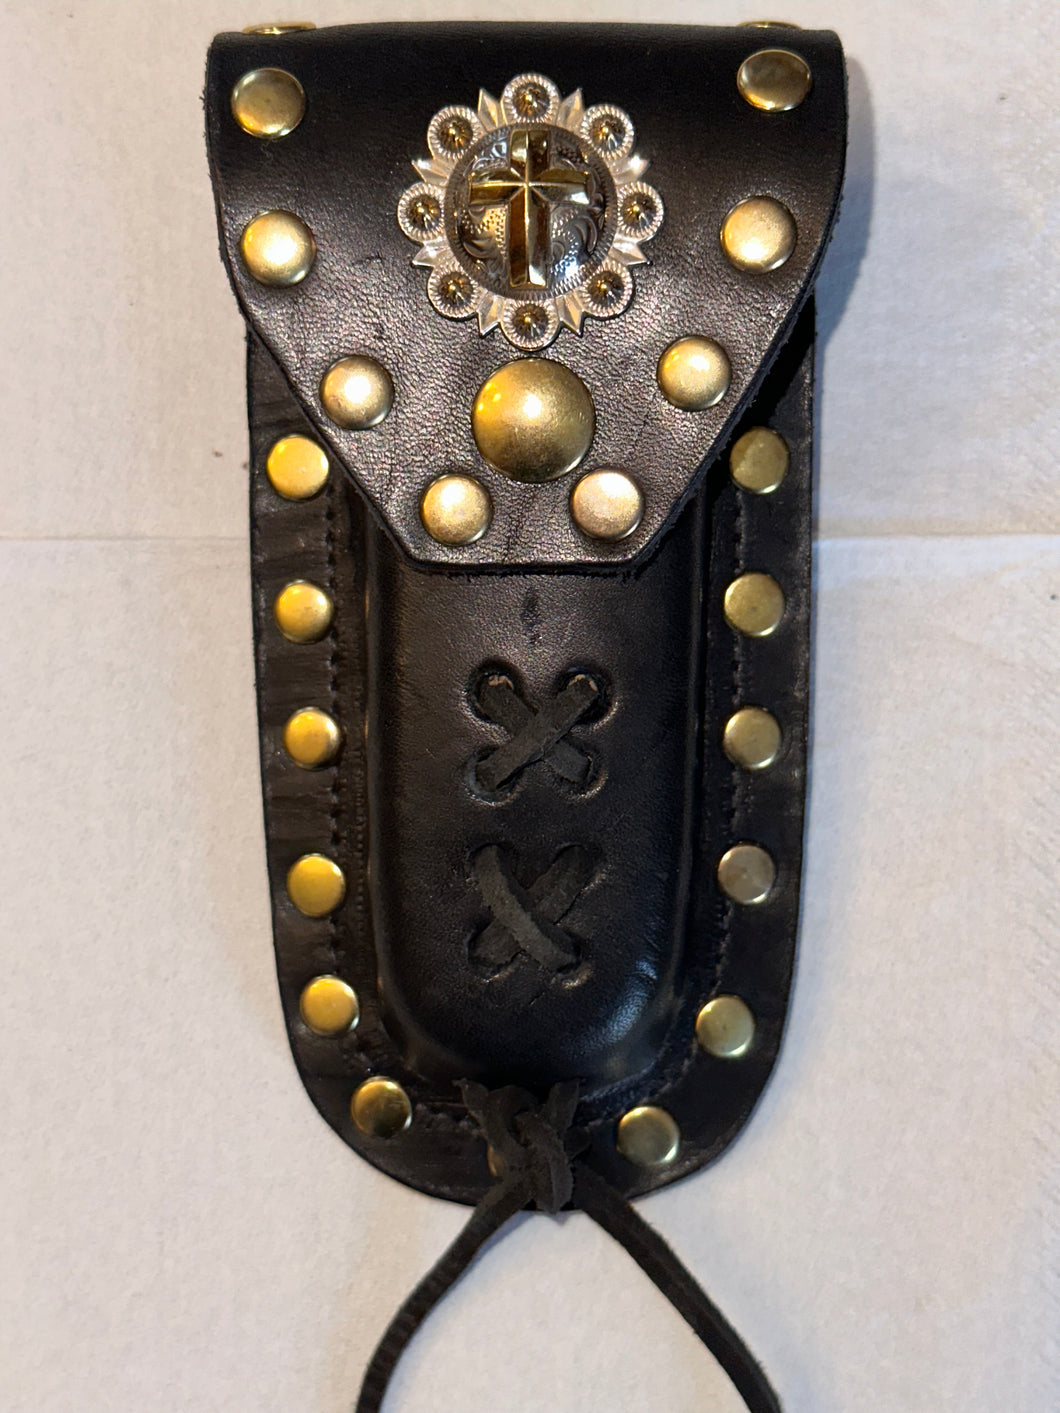 Buck 110 Leather Knife Case - Cross with Stars (Black)